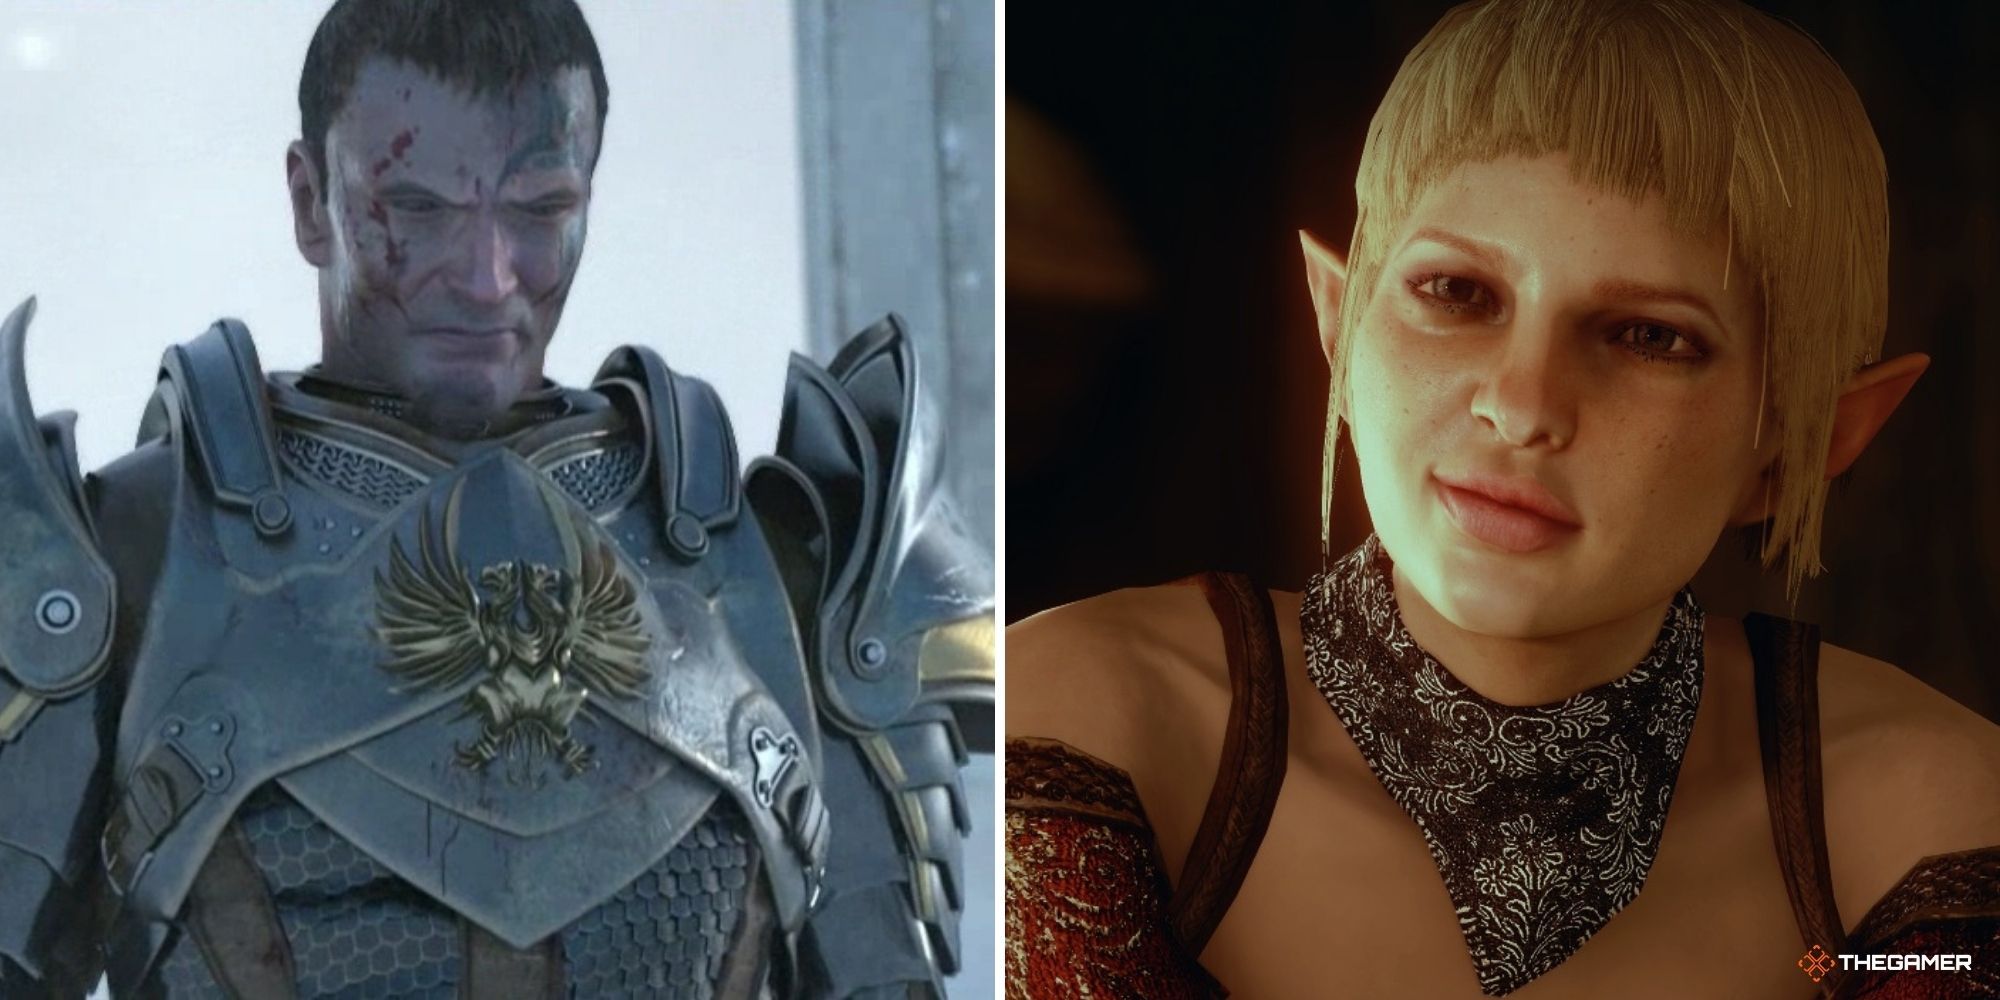 Split image of Dragon Age - Hero of Ferelden from Dragon Age Origins on left, Sera from Dragon Age Inquisition on right